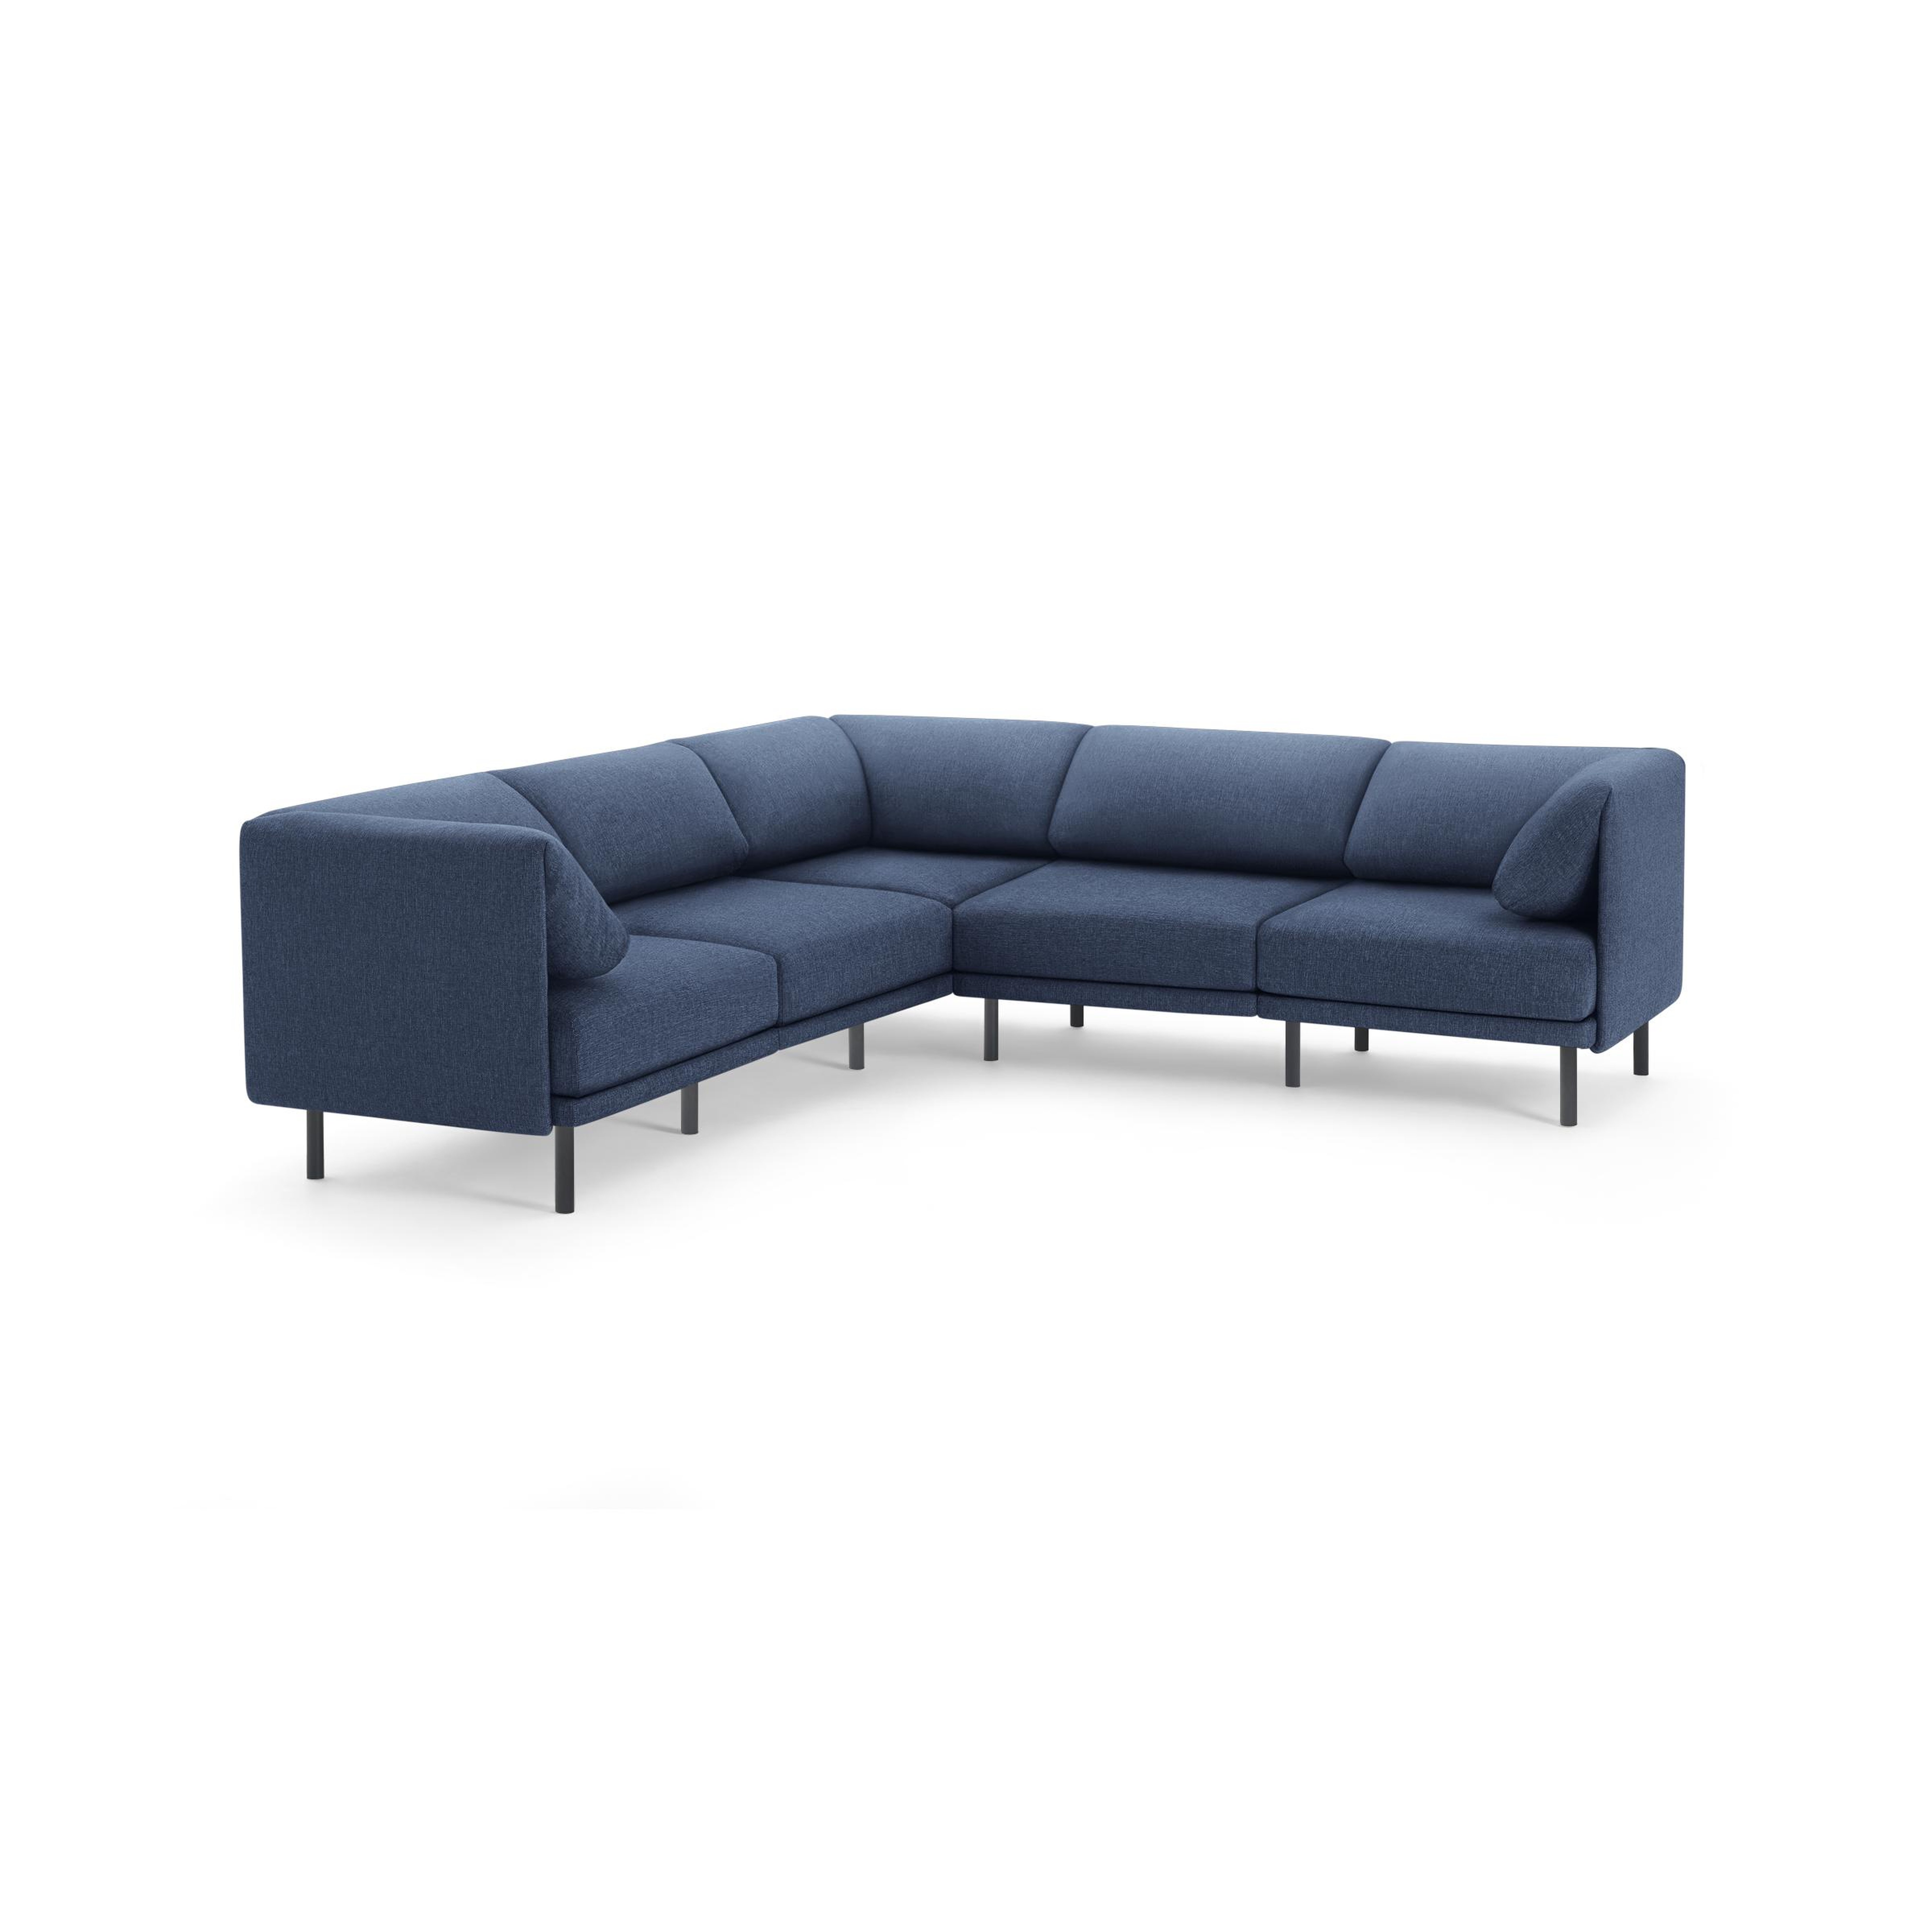 The Range 5-Piece Sectional in Navy Blue - Burrow